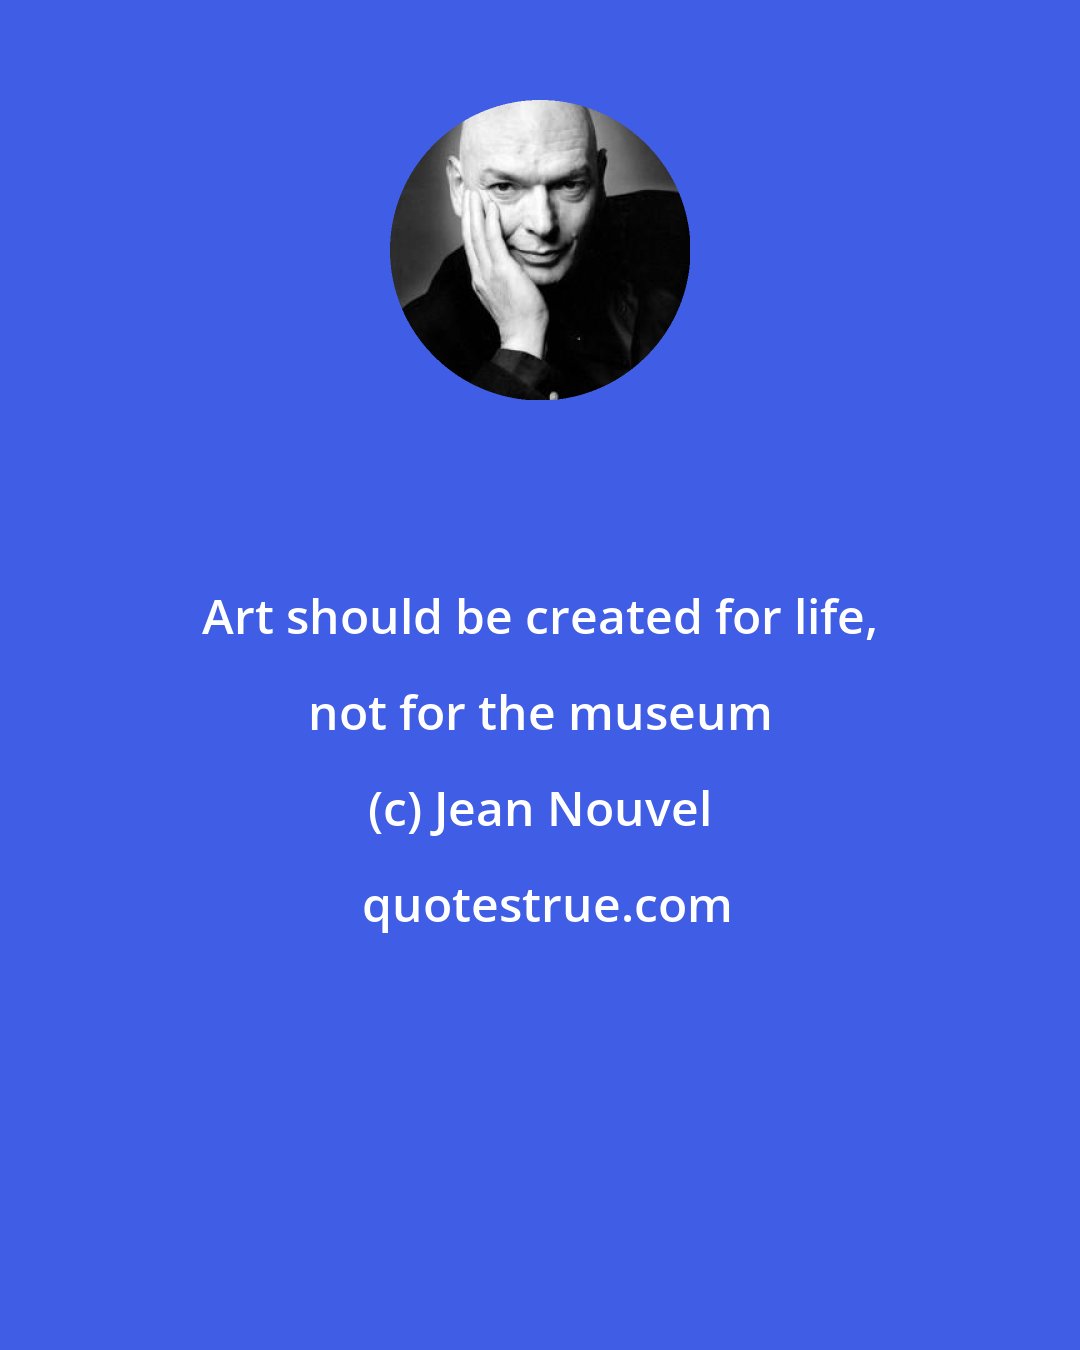 Jean Nouvel: Art should be created for life, not for the museum